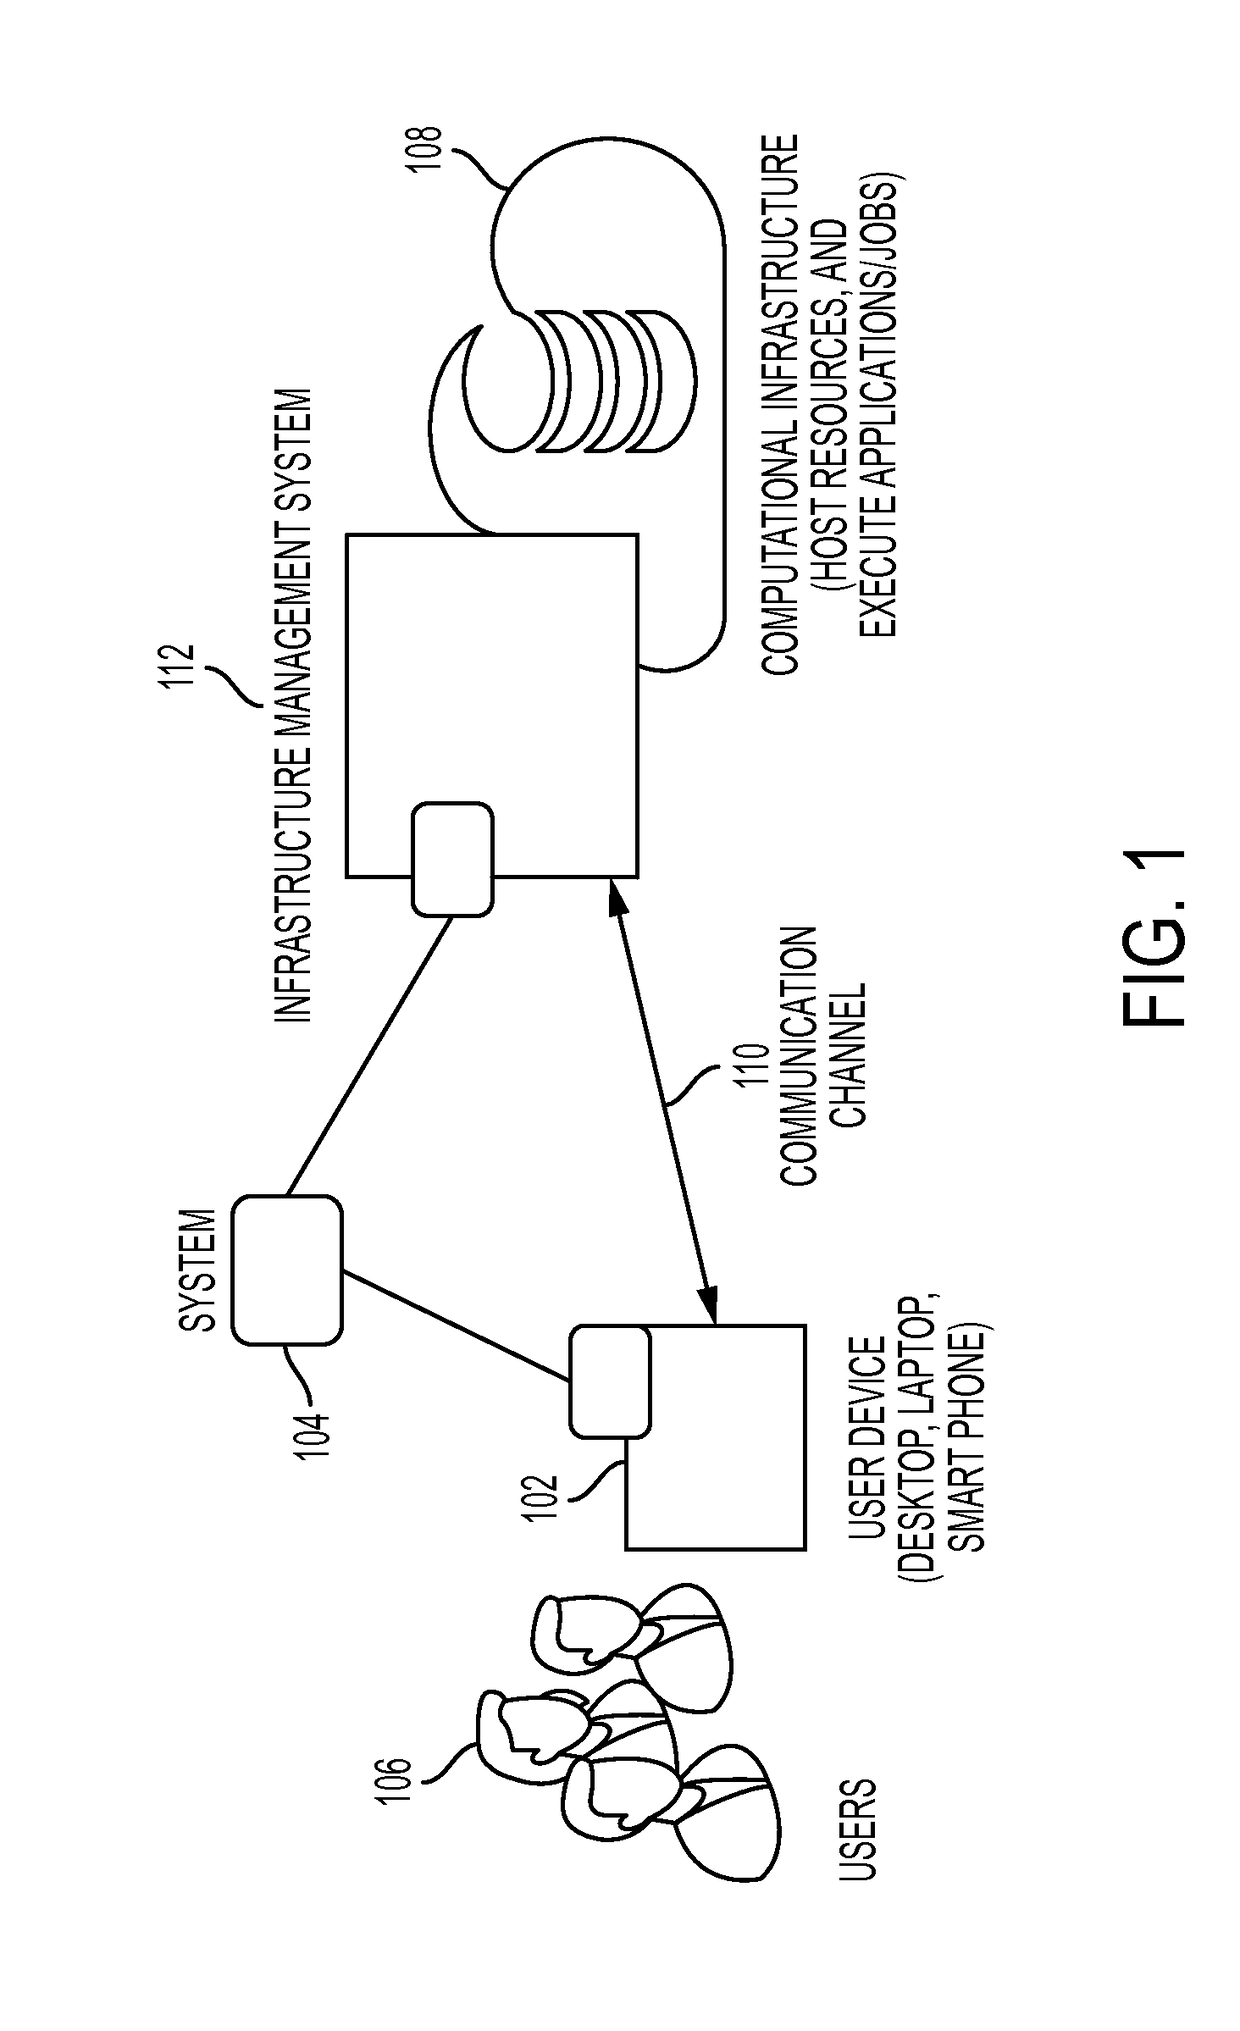 User interface and system supporting user decision making and readjustments in computer-executable job allocations in the cloud